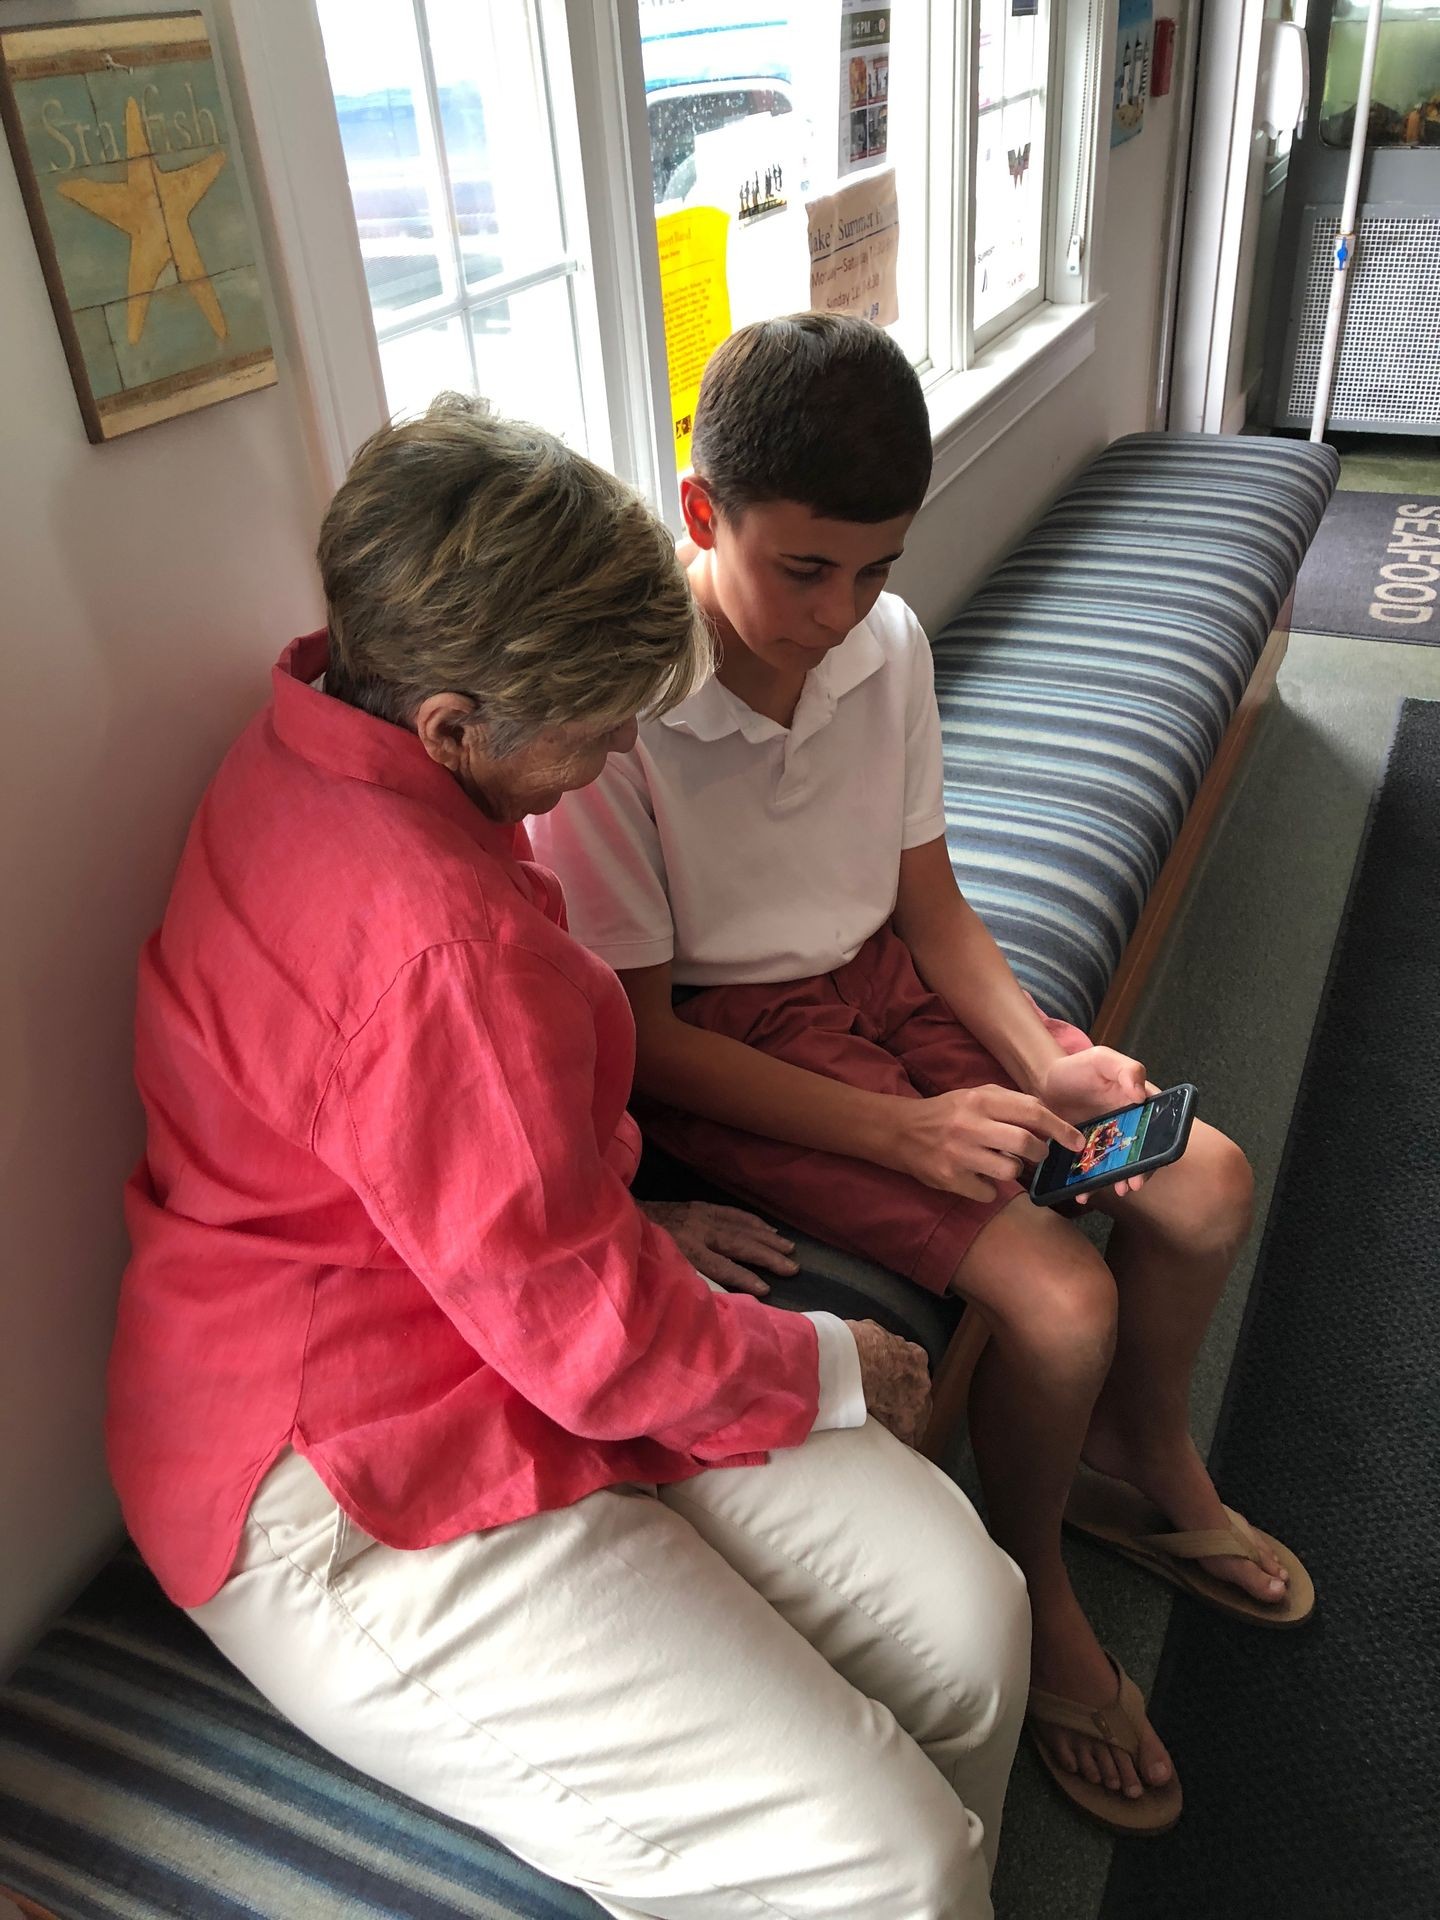 This is a picture of a young boy reading aloud to his grandmother from NANA’S BOOKS’ digital library. She is wearing a bright pink linen top and they are happily sharing a moment.  NANA’S BOOKS unite generations and help care partners and clinicians with engaged conversations through dignified reading and age and ability-appropriate books.